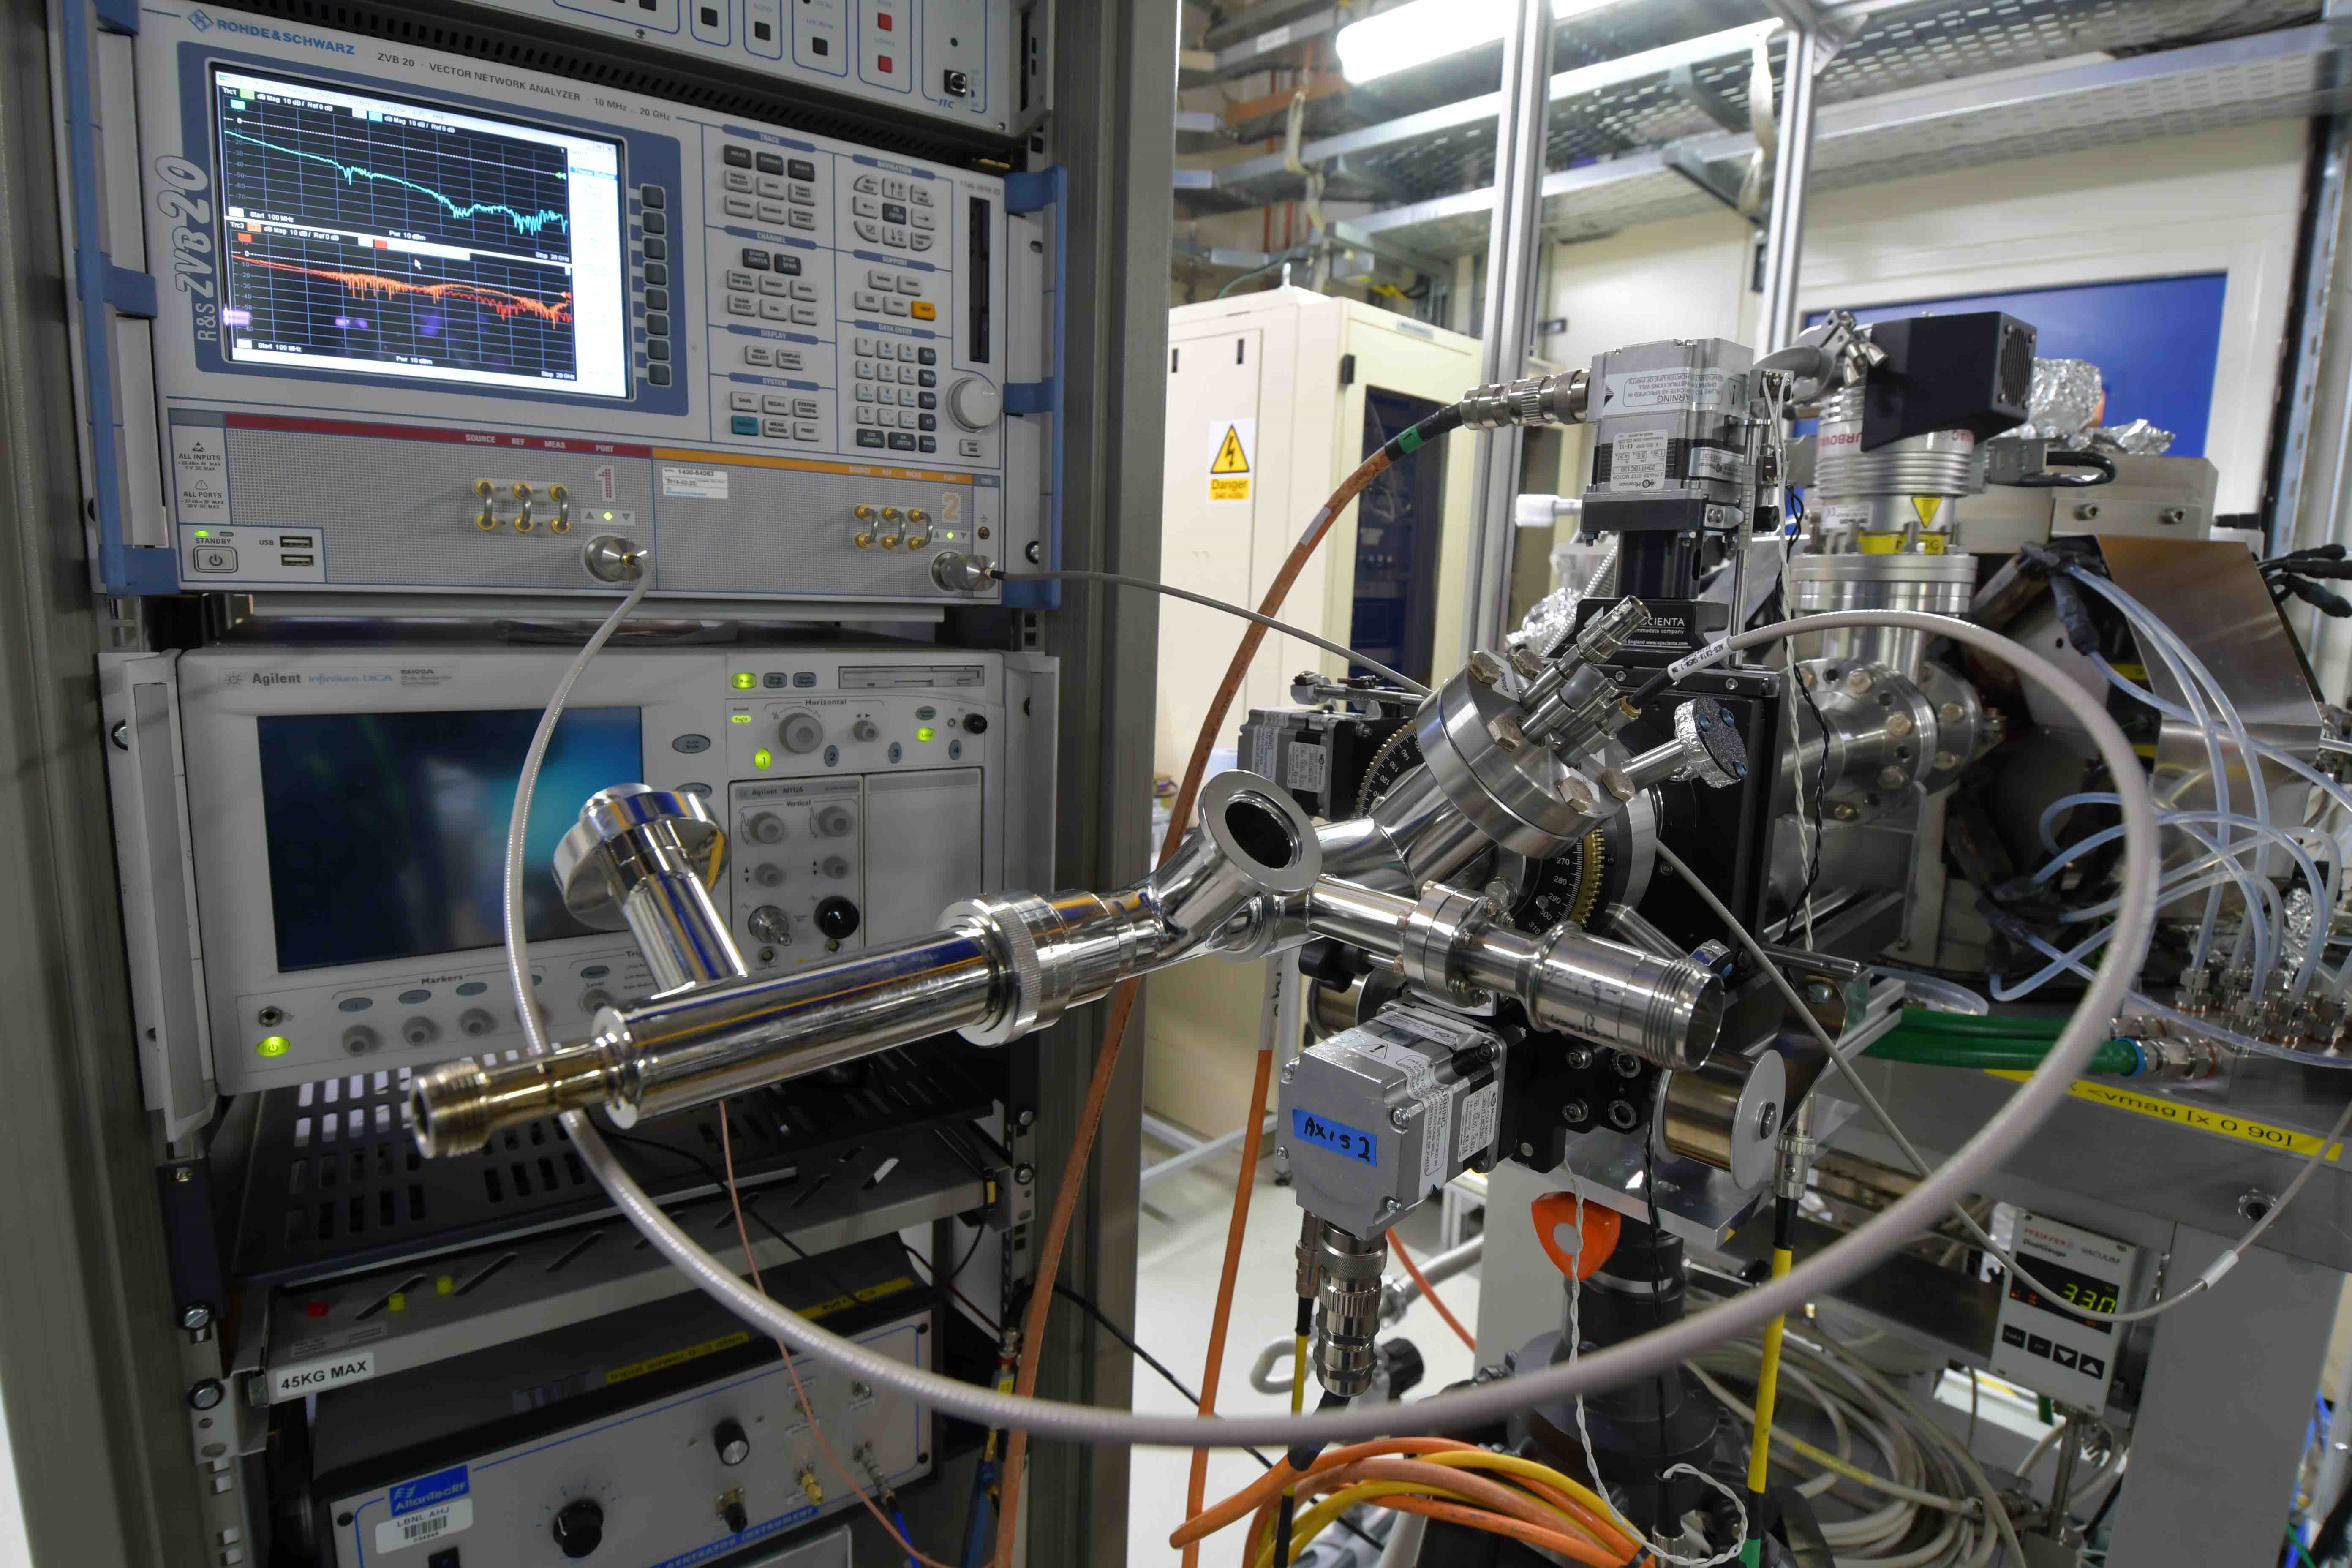 Fig. 2: The X-ray detected Ferromagnetic Resonance (XFMR) kit installed in the Portable Octupole Magnet System (POMS) on beamline I10 at Diamond Light Source.